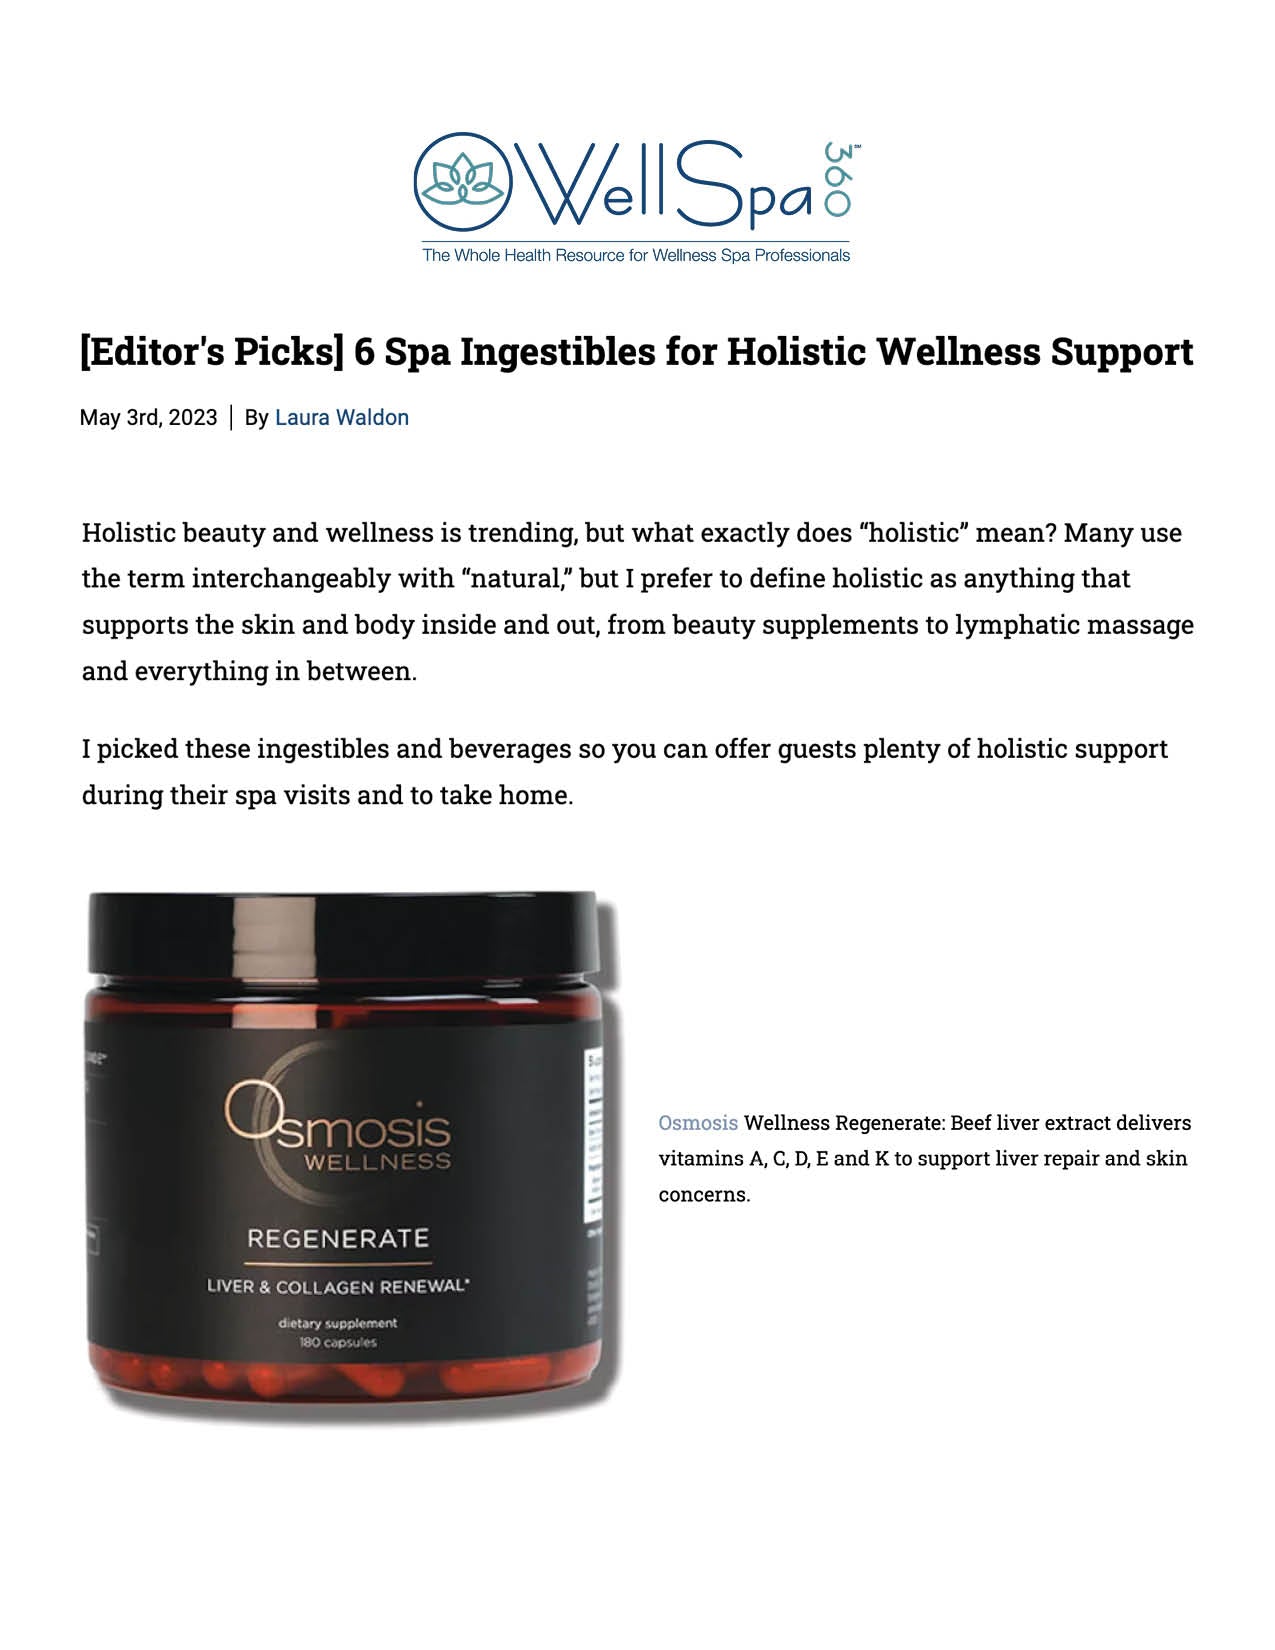 Osmosis Regenerate was featured in a roundup on WellSpa 360 in an round up titled [Editor's Picks] 6 Spa Ingestibles for Holistic Wellness Support